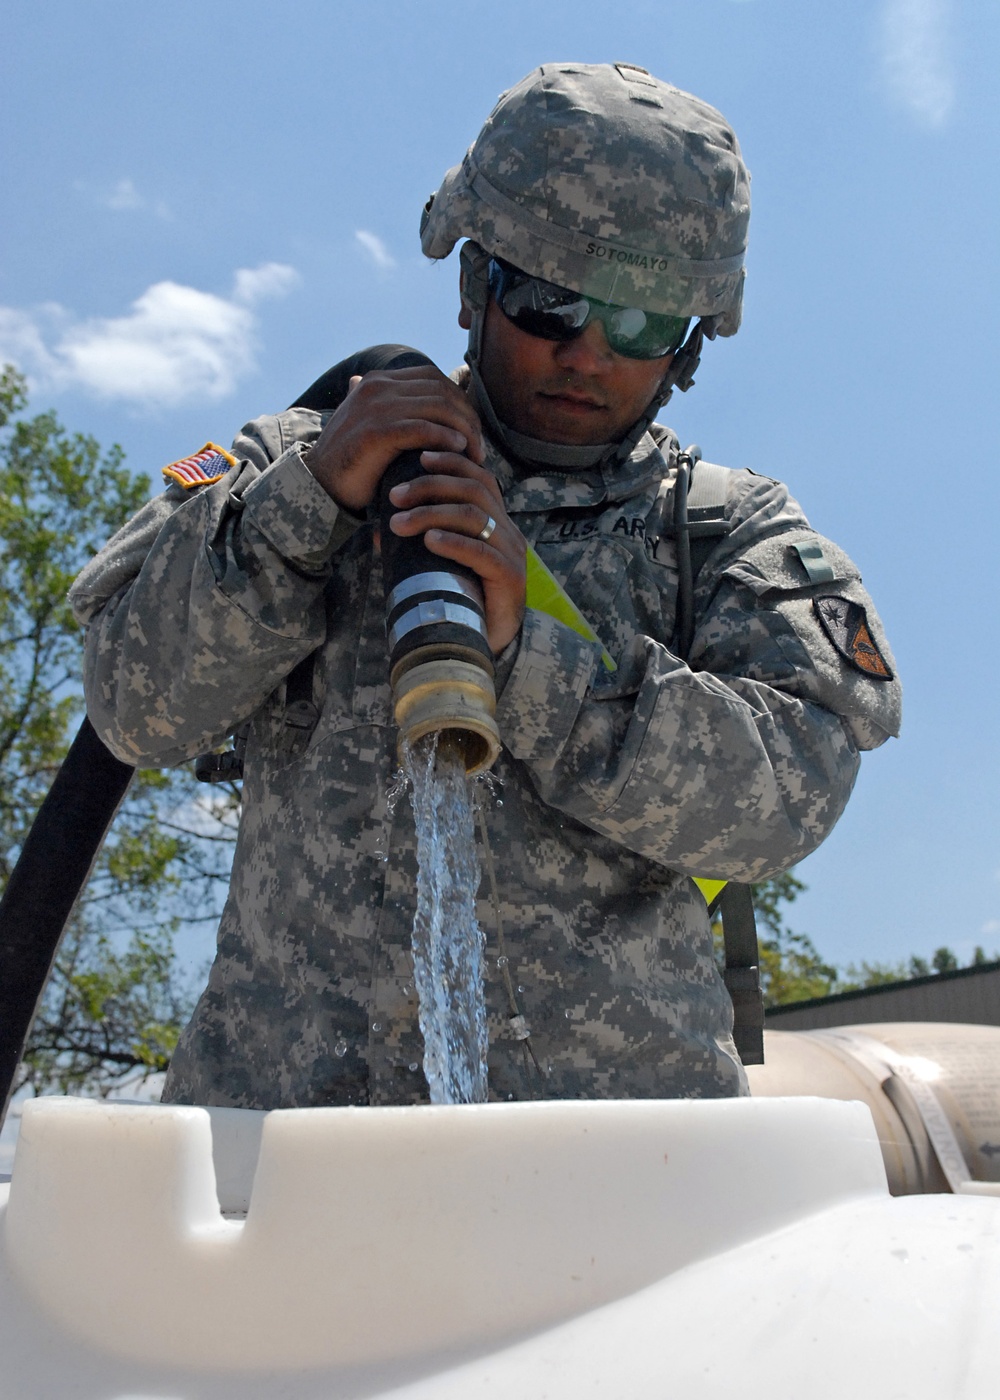 Fort Bragg specialists provide purified water to Vibrant Response troops